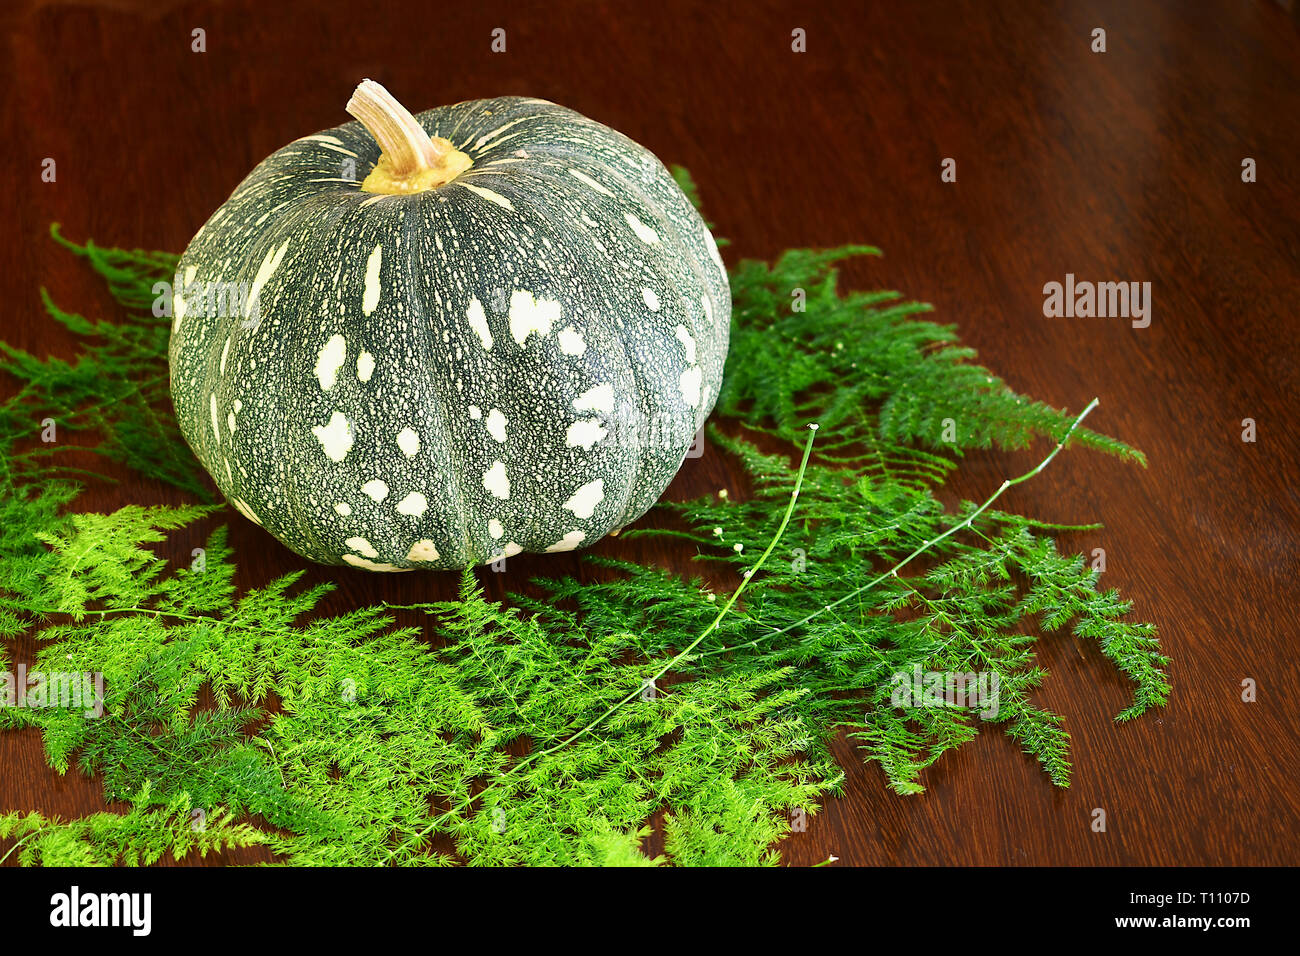 A pumpkin and sheets in the table Stock Photo